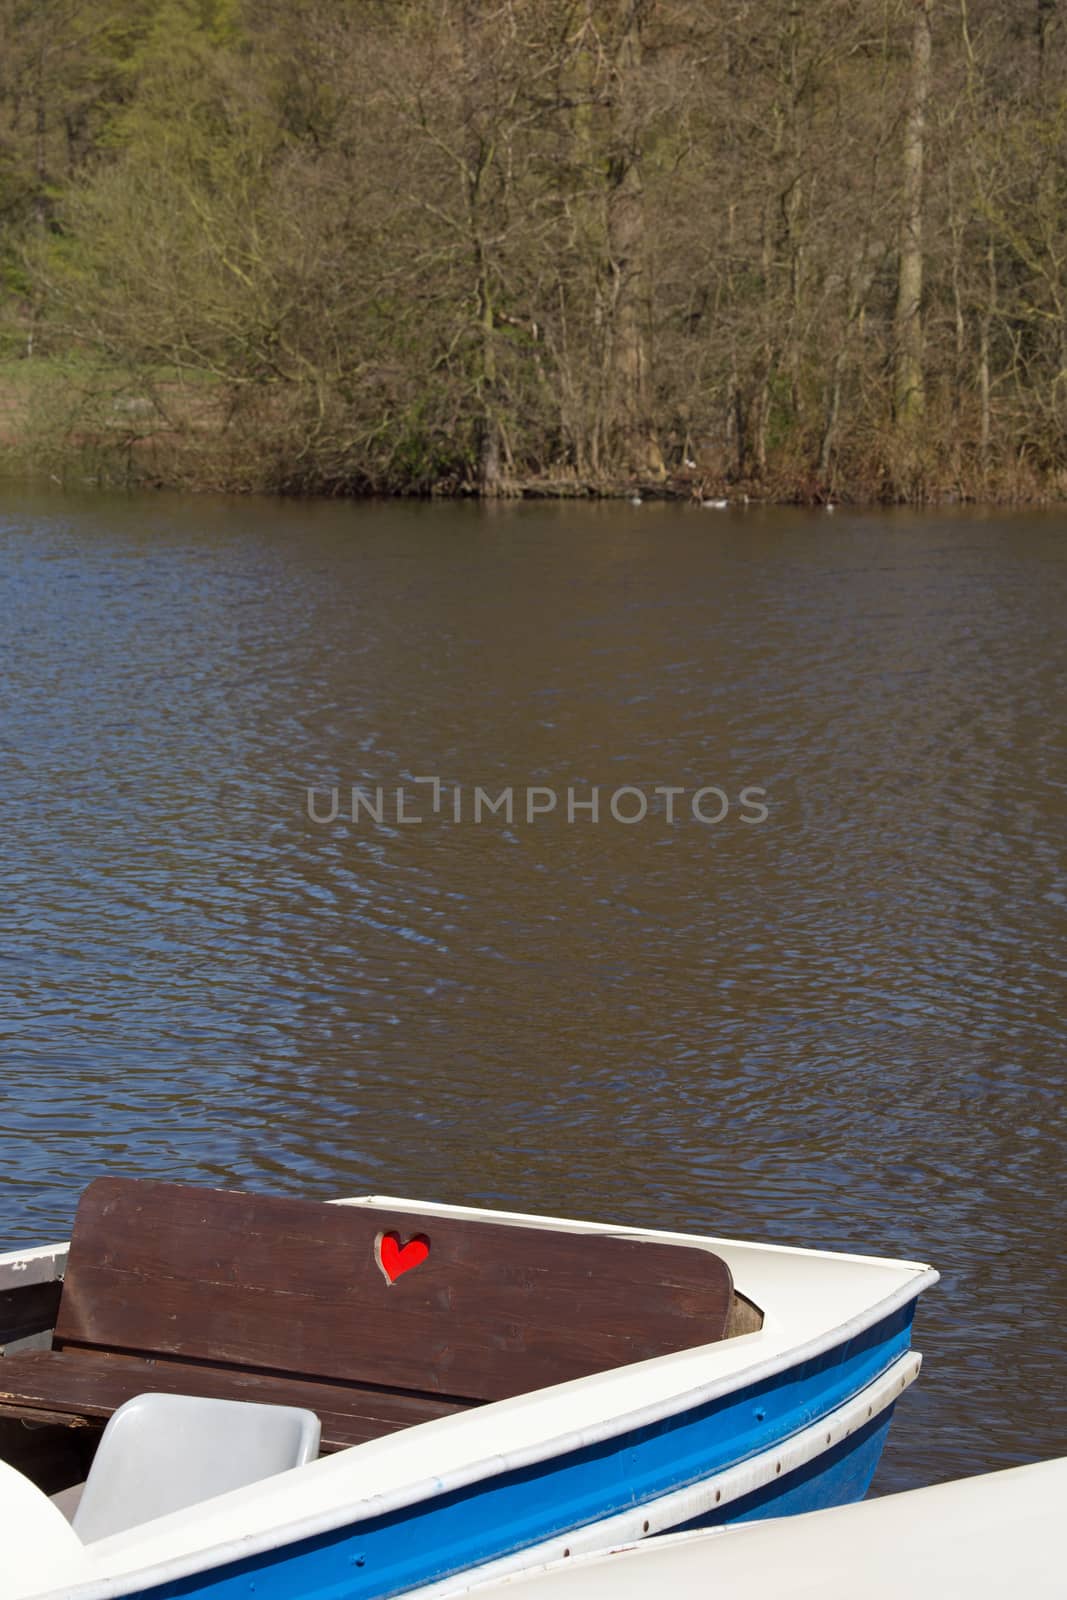 Pedalo boat with heart on a lake